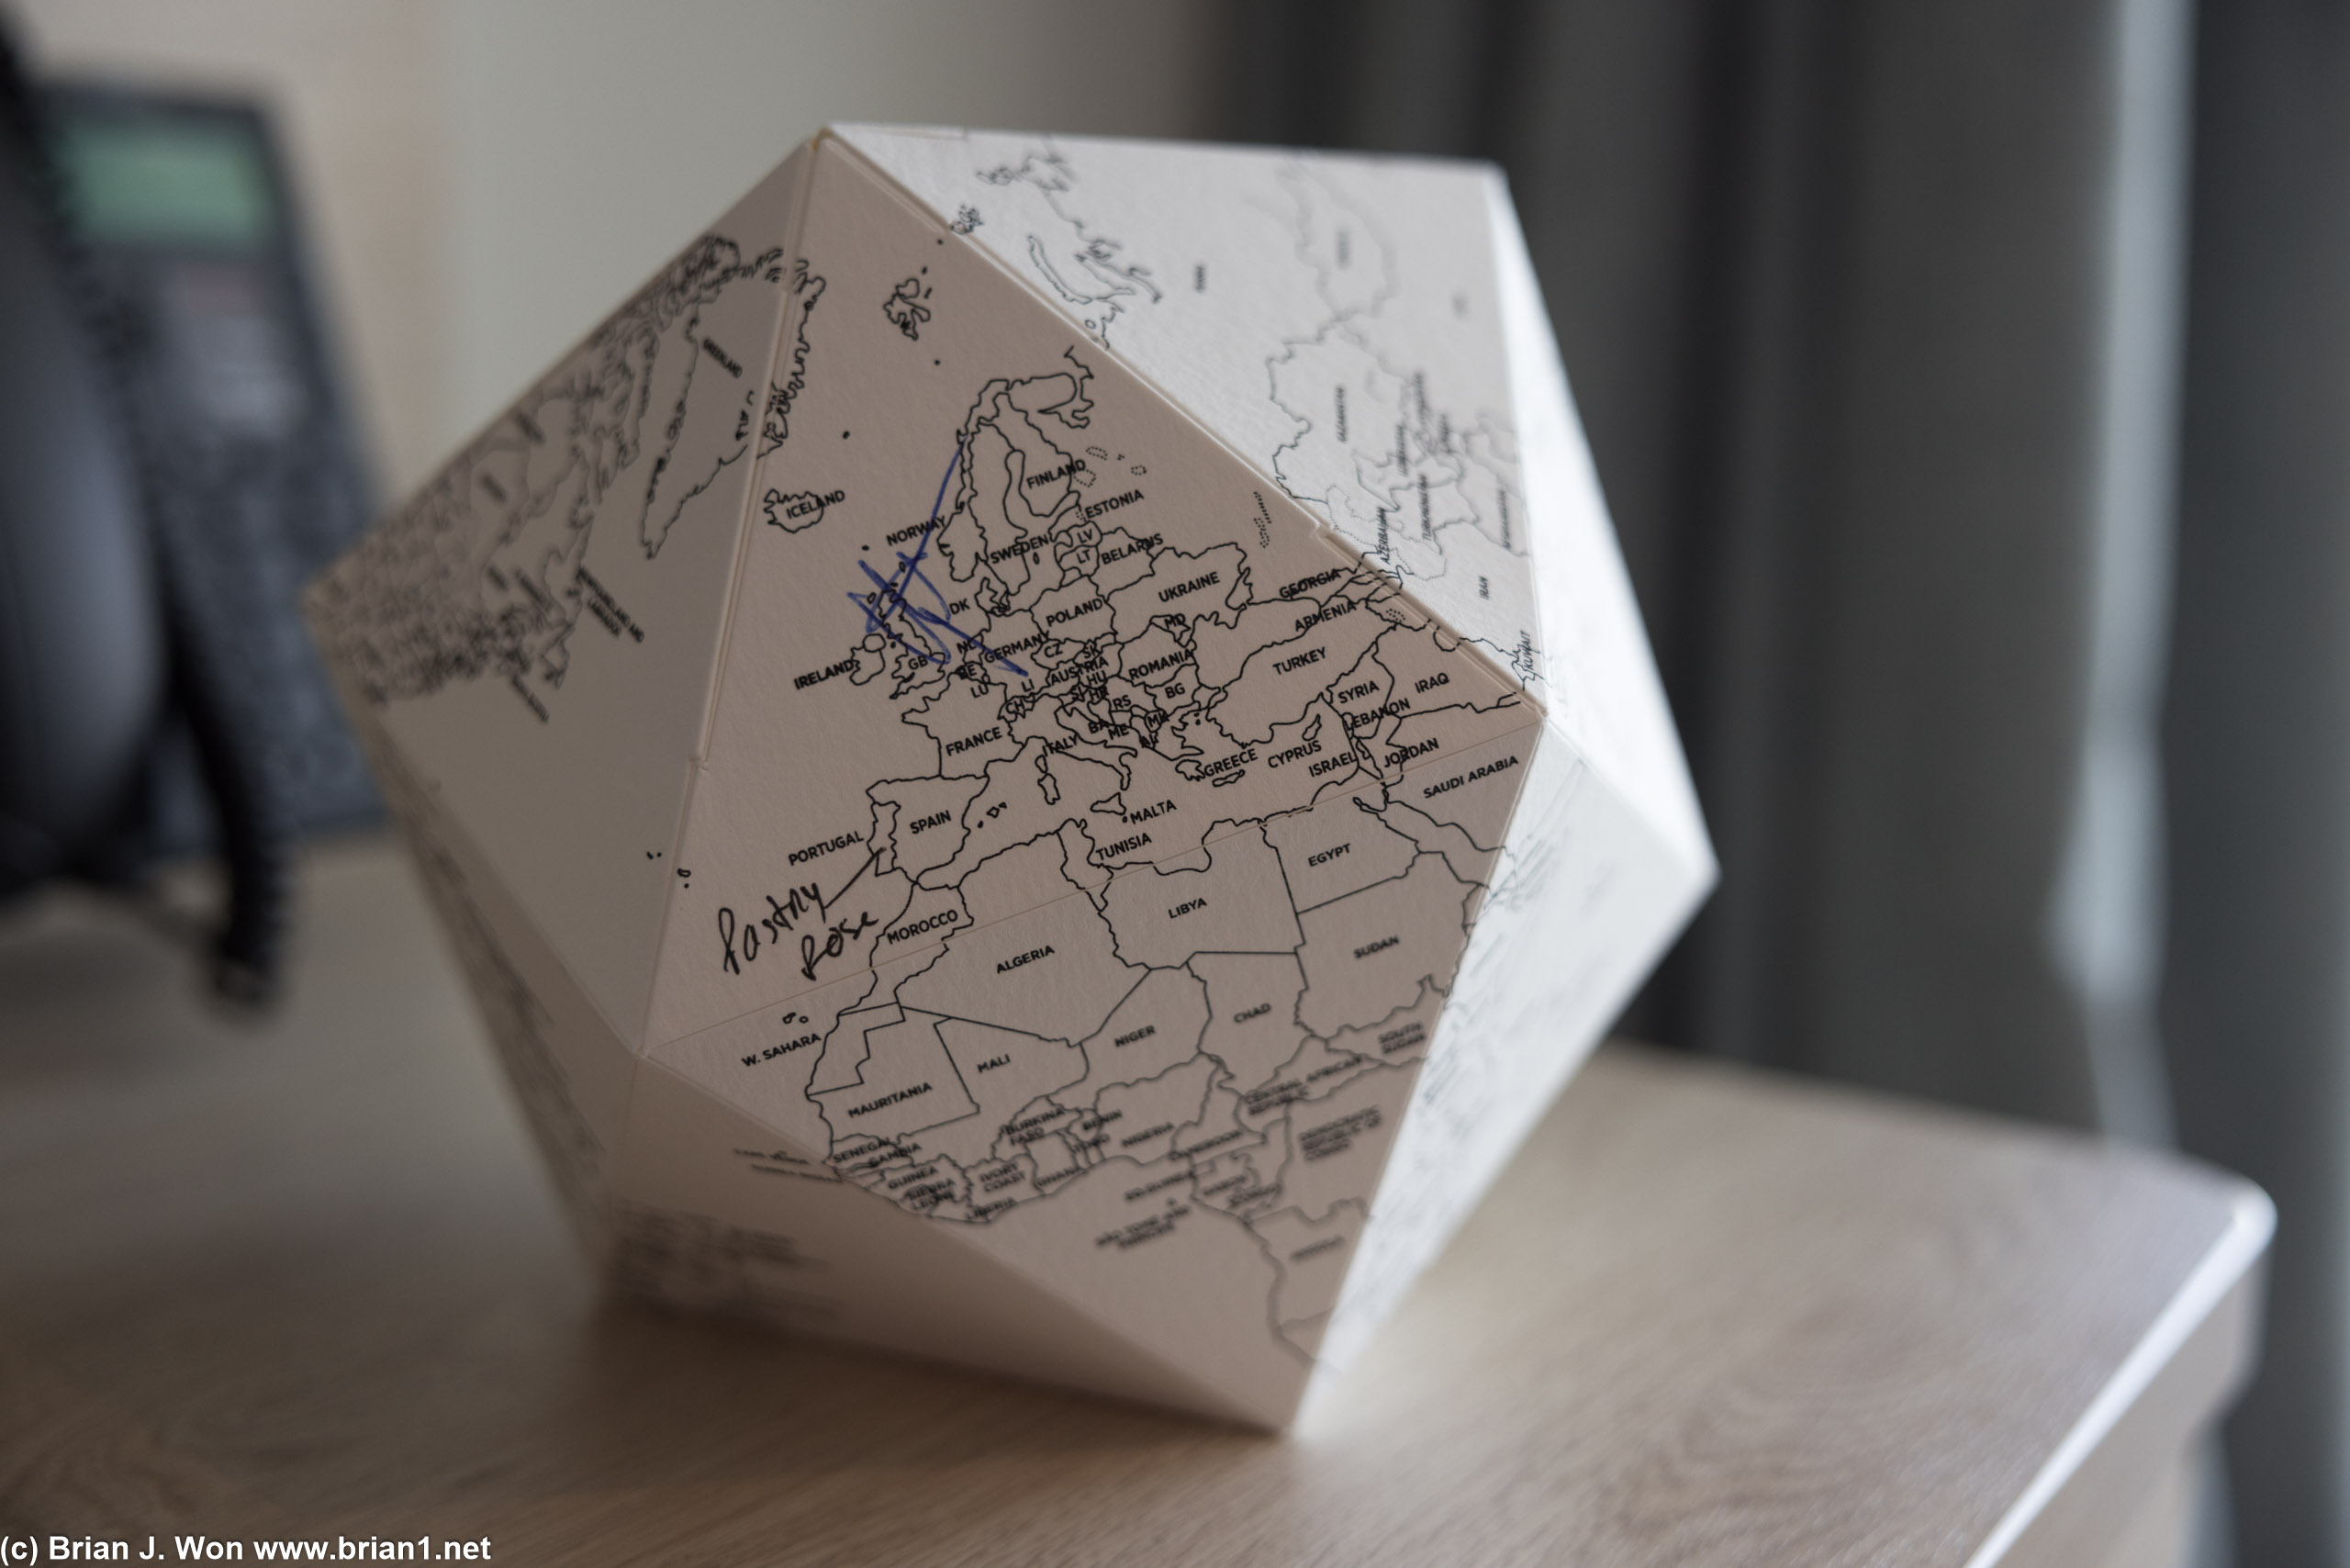 Foldable globe signed by all the chefs.